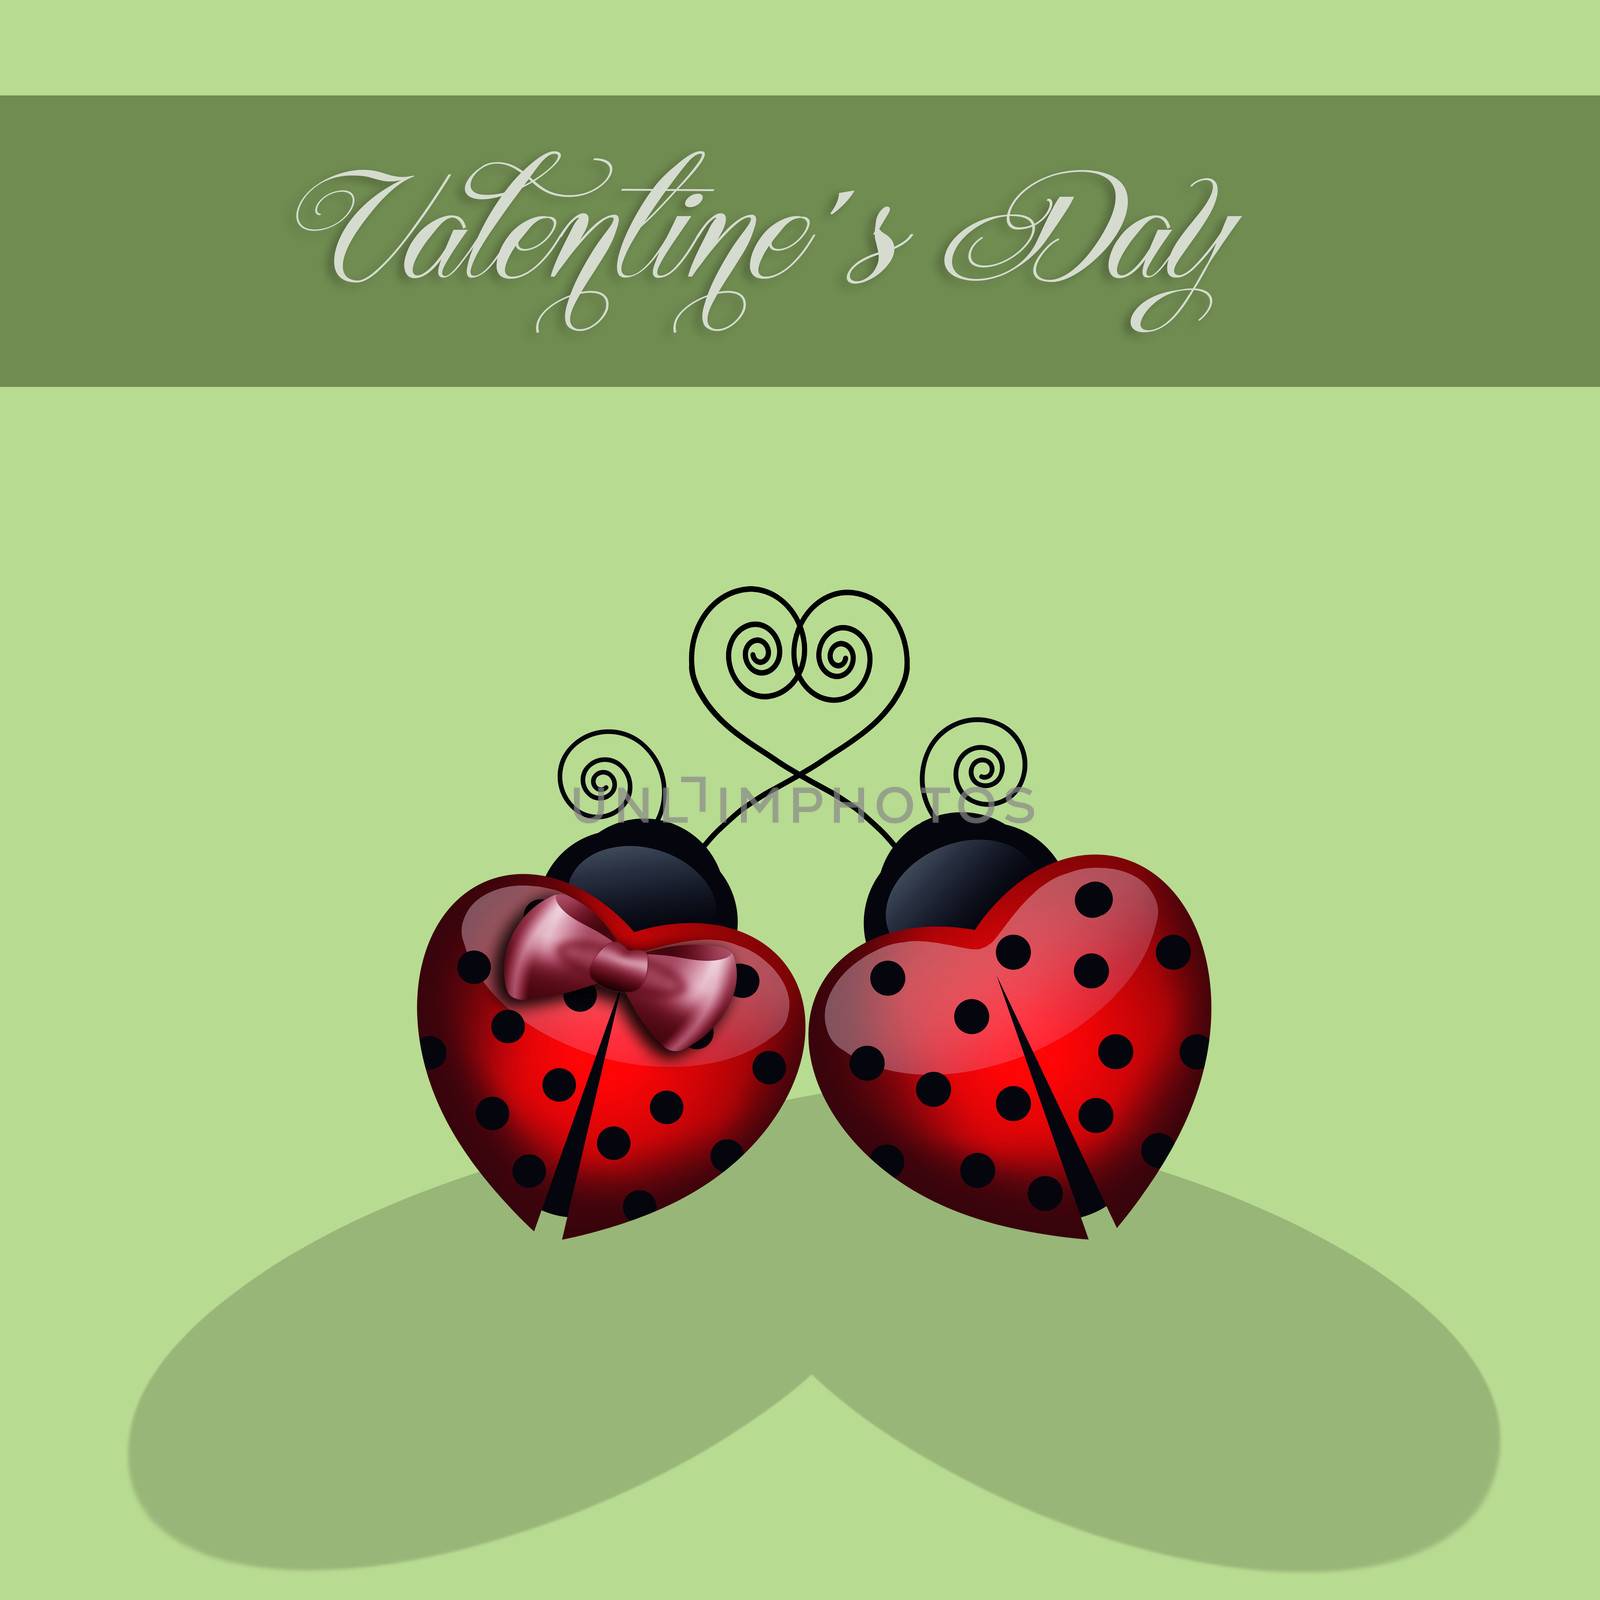 Ladybugs in love with heart for Valentine's Day